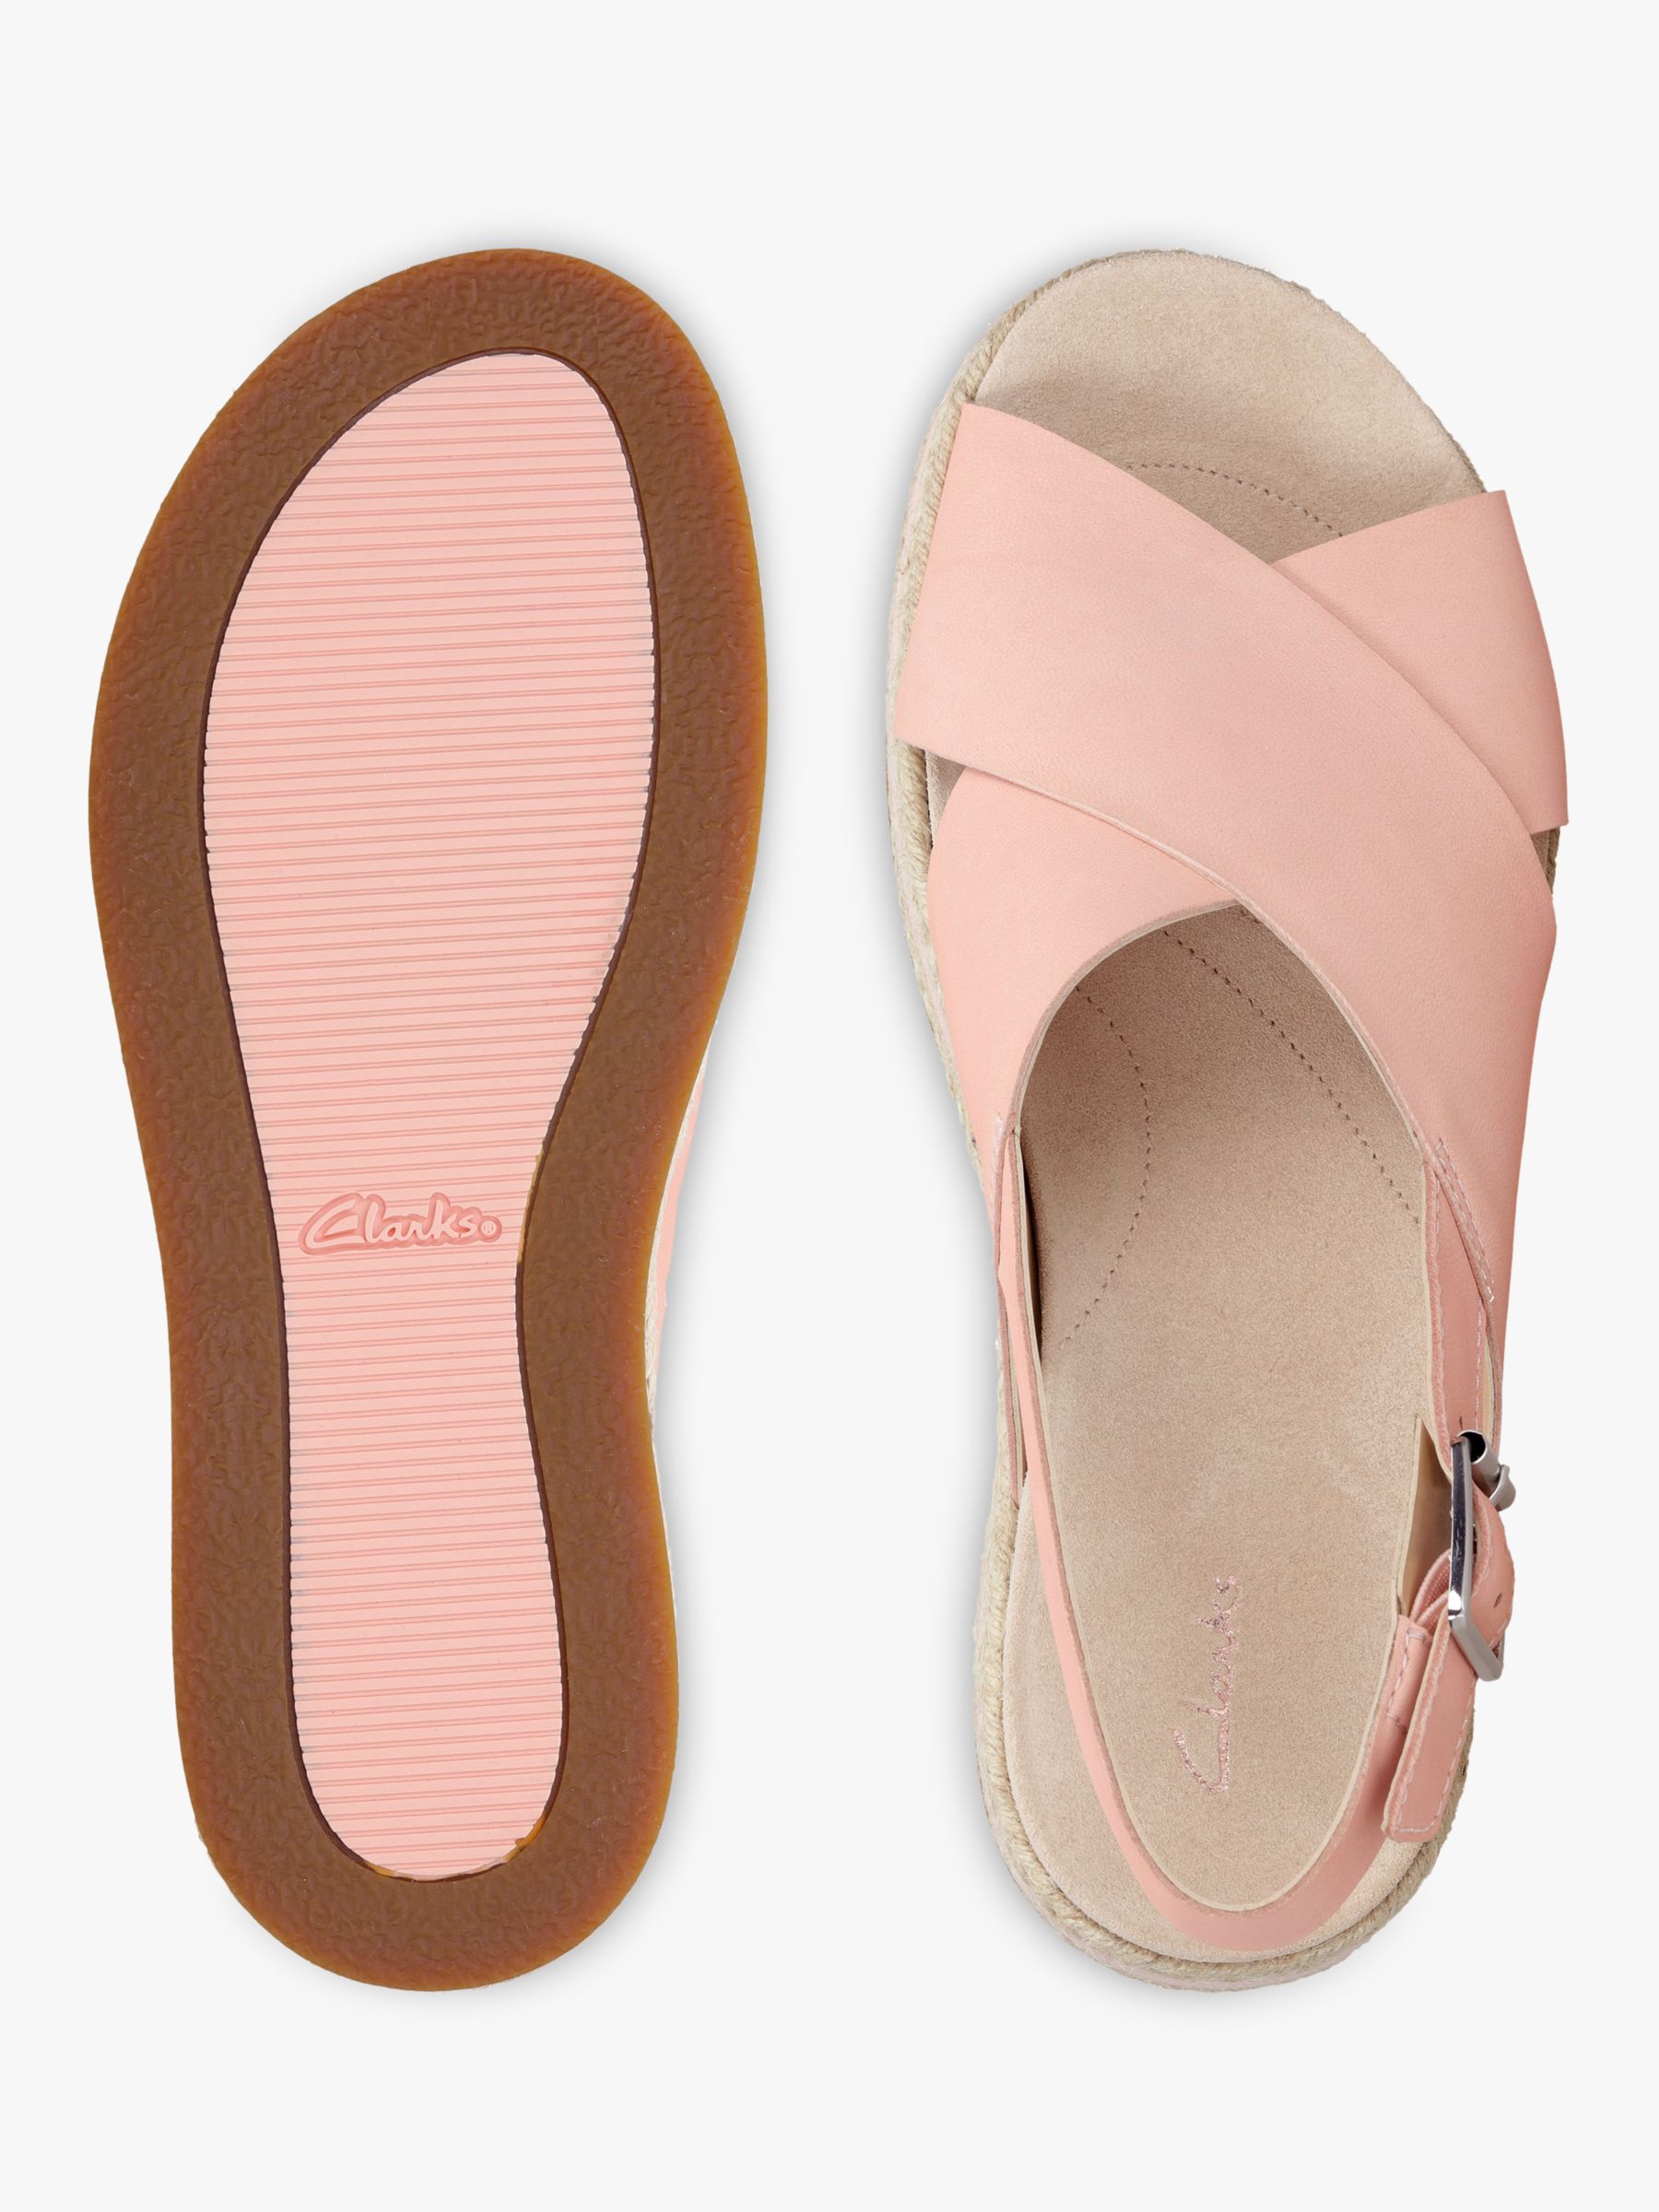 clarks pink shoes and sandals